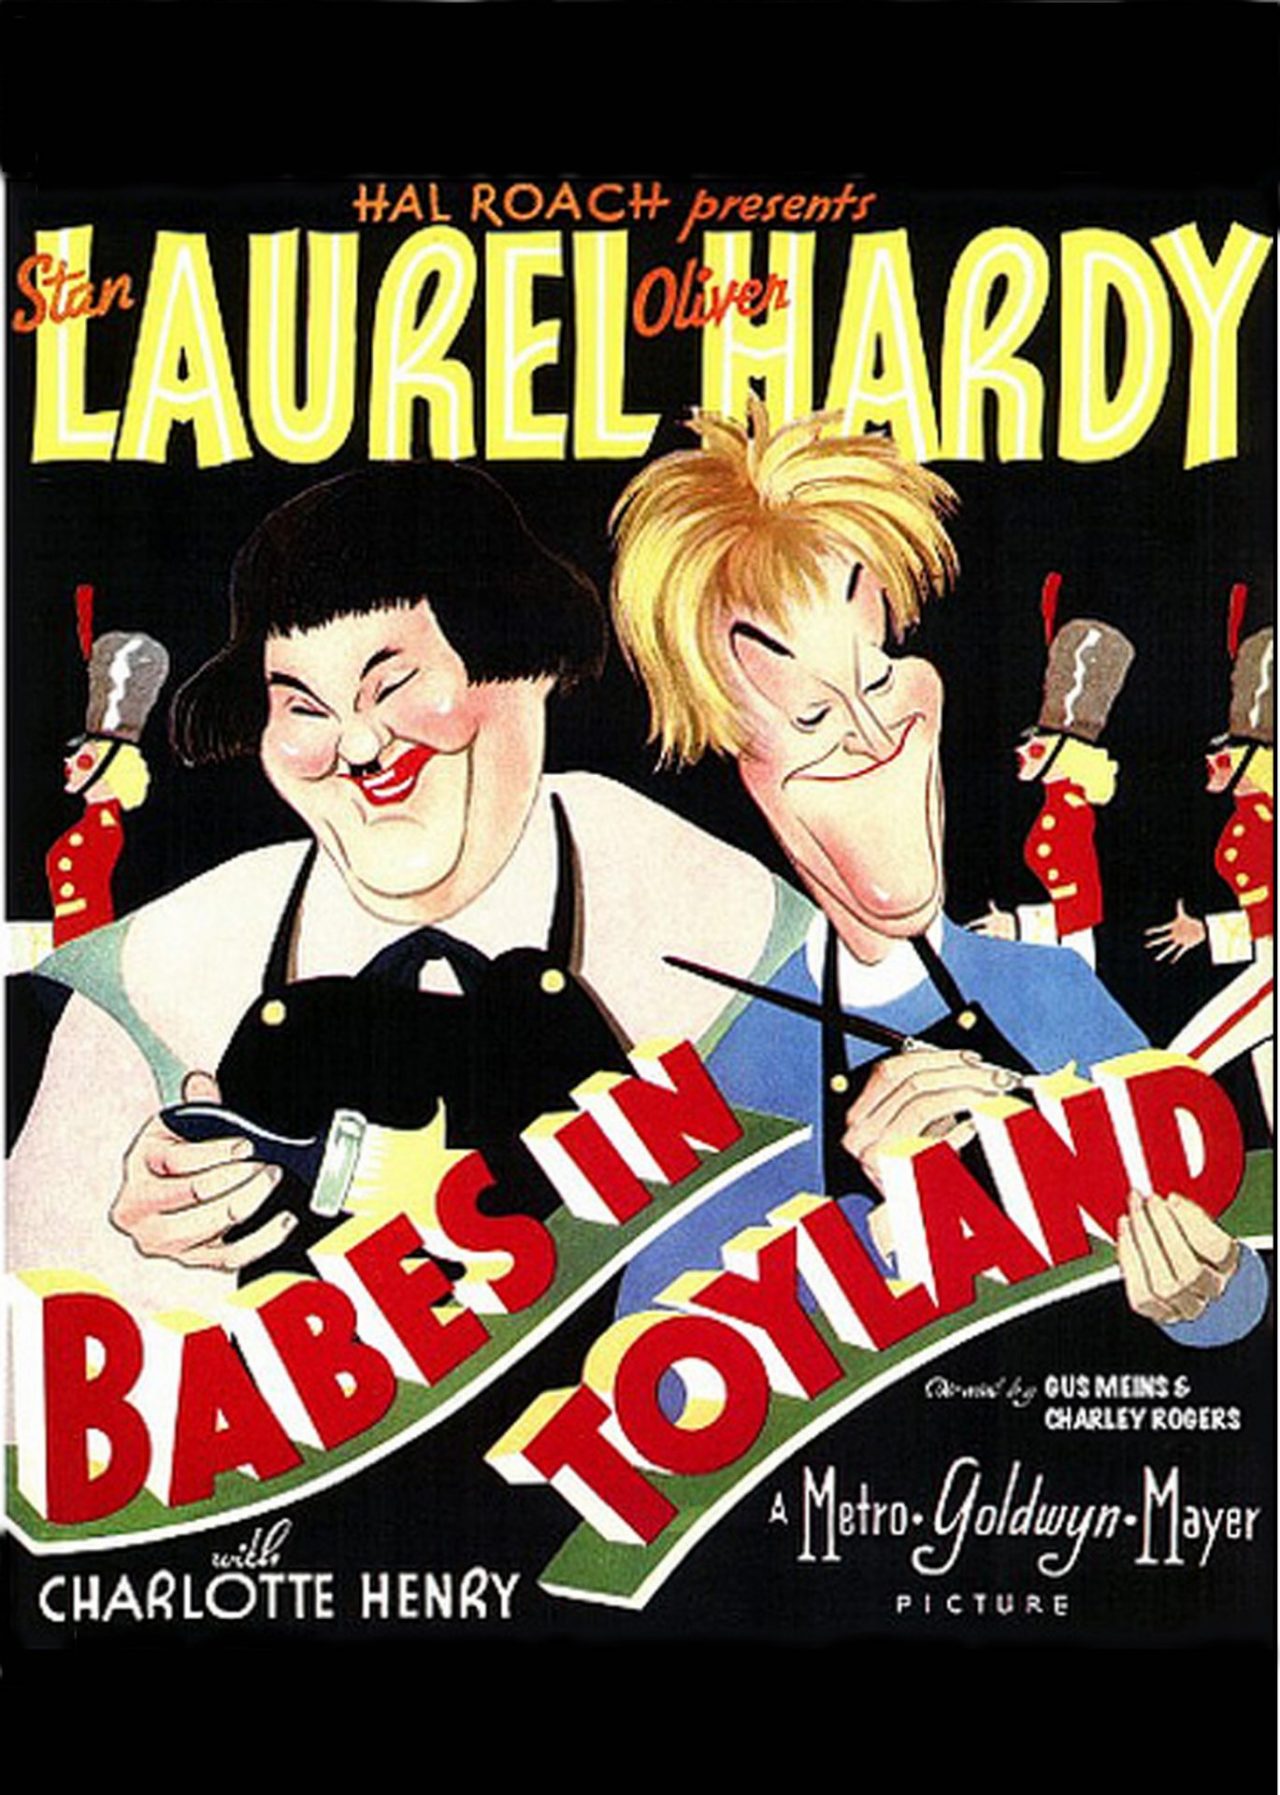 Babes in Toyland – Laurel & Hardy | Soper Reese Theatre